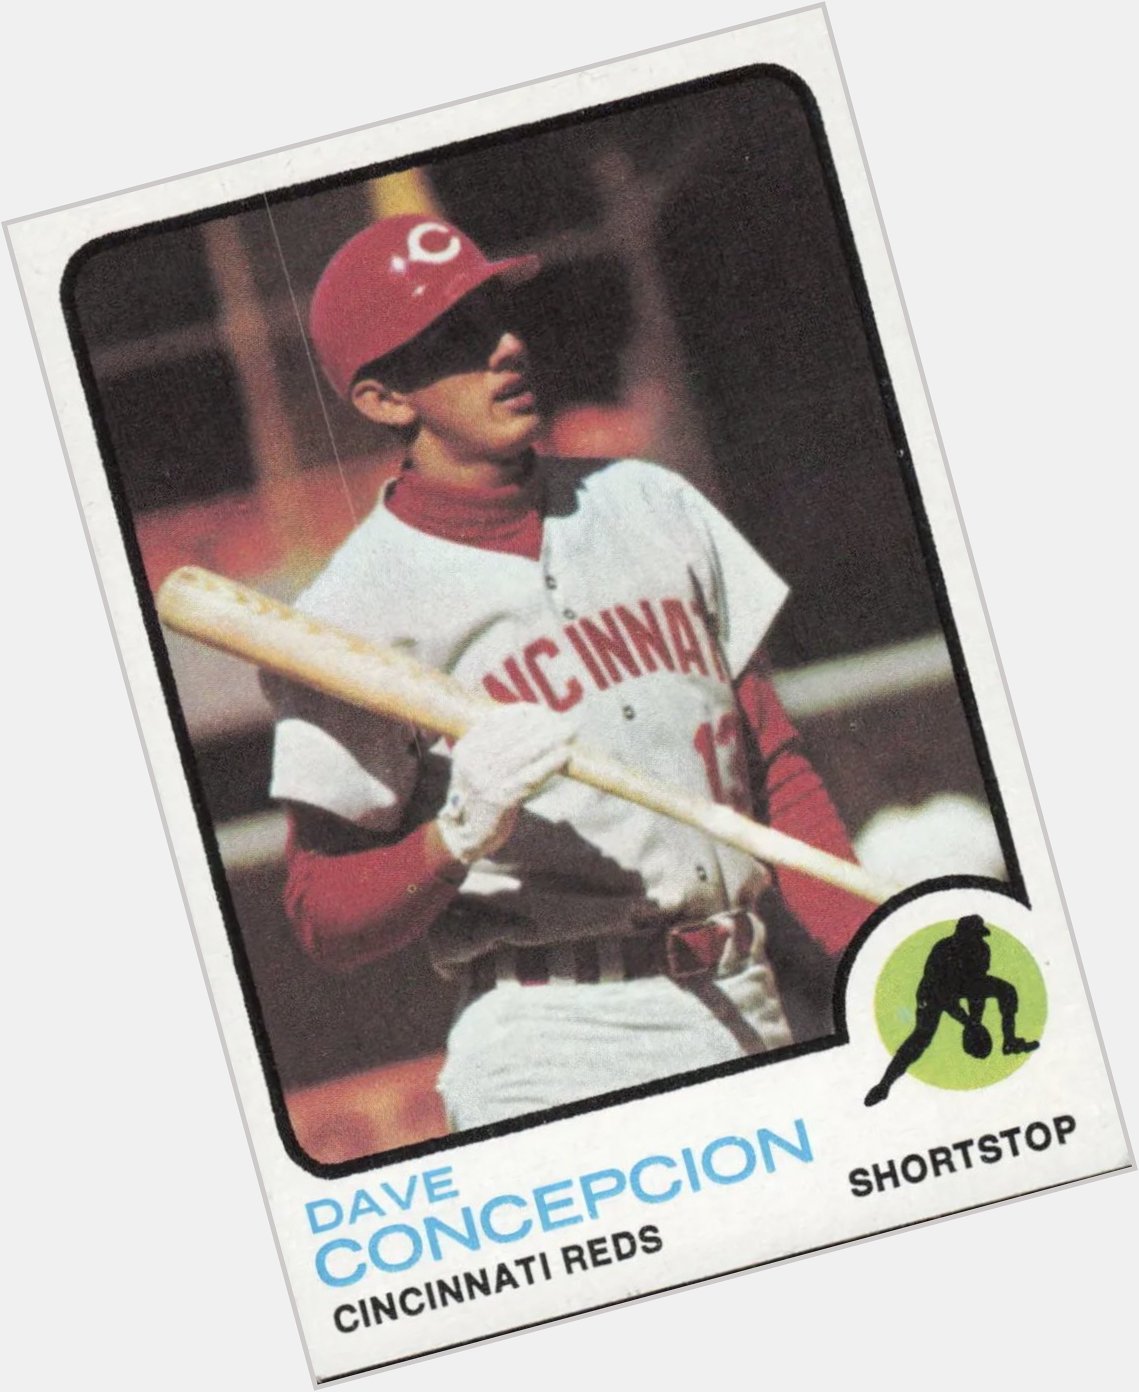 Happy Birthday June 17th to 2 time World Series Champion Dave Concepcion 